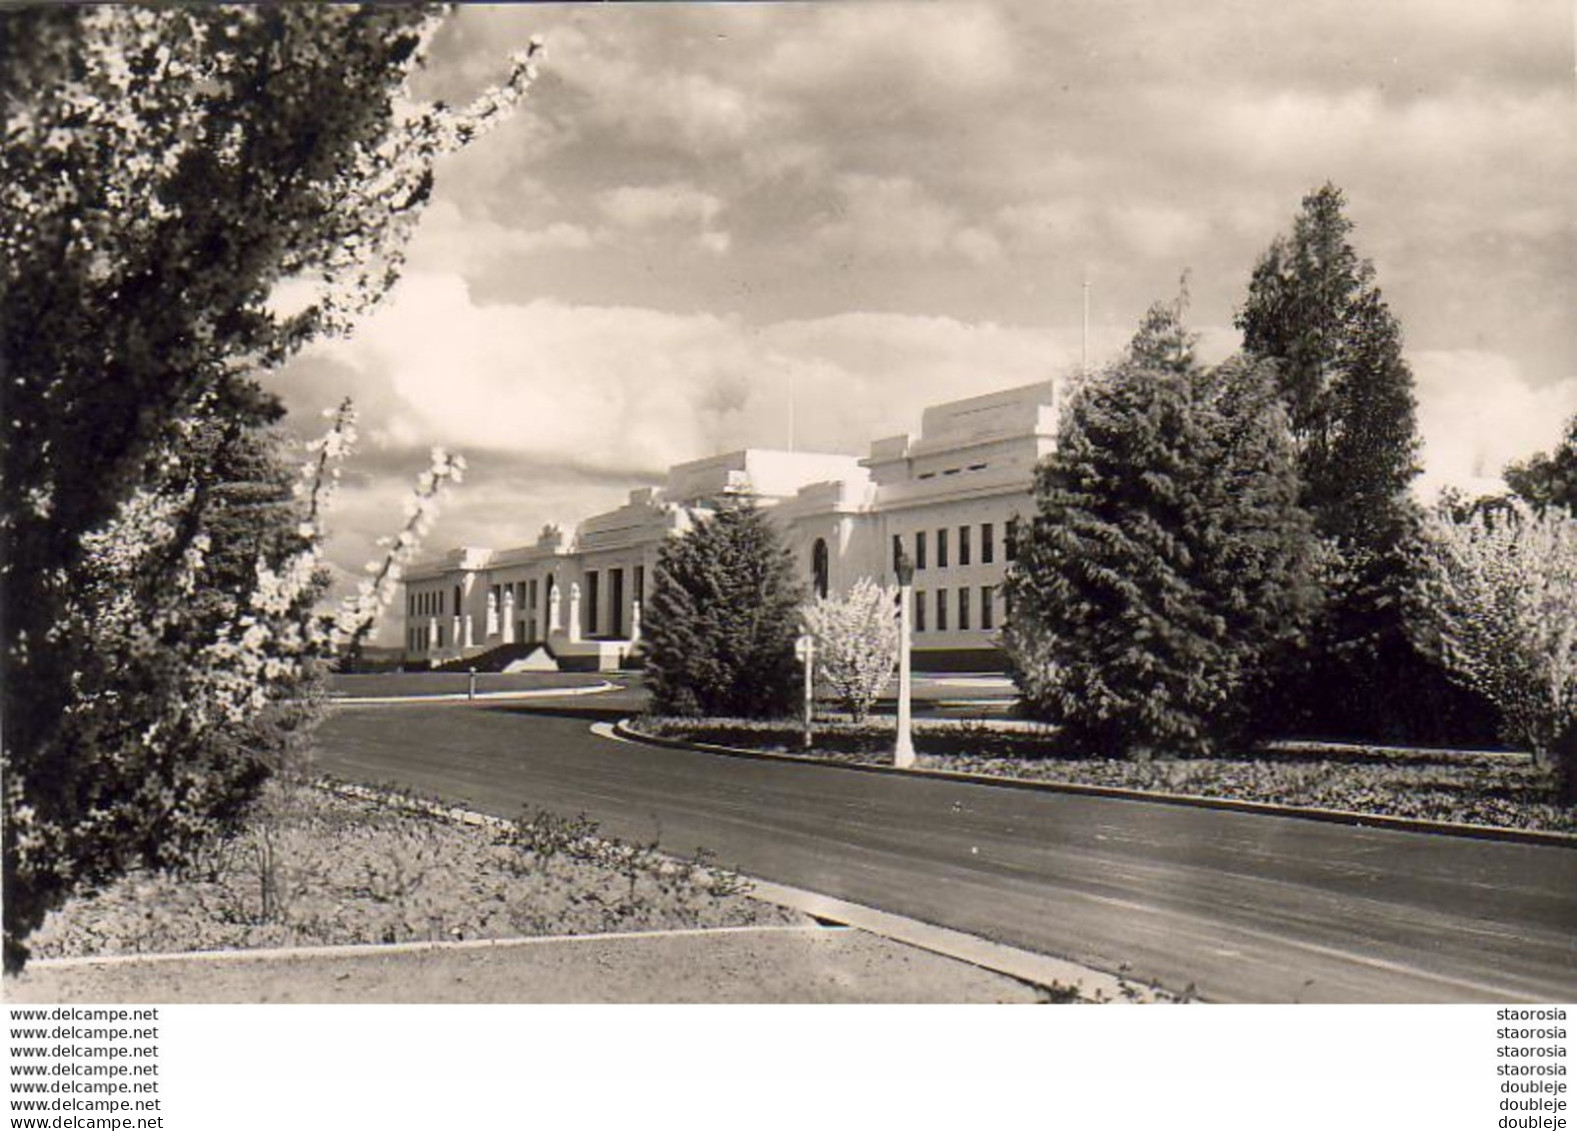 CANBERRA  (A.C.T)   Federal Parliament House   ( Real Photo ) - Canberra (ACT)